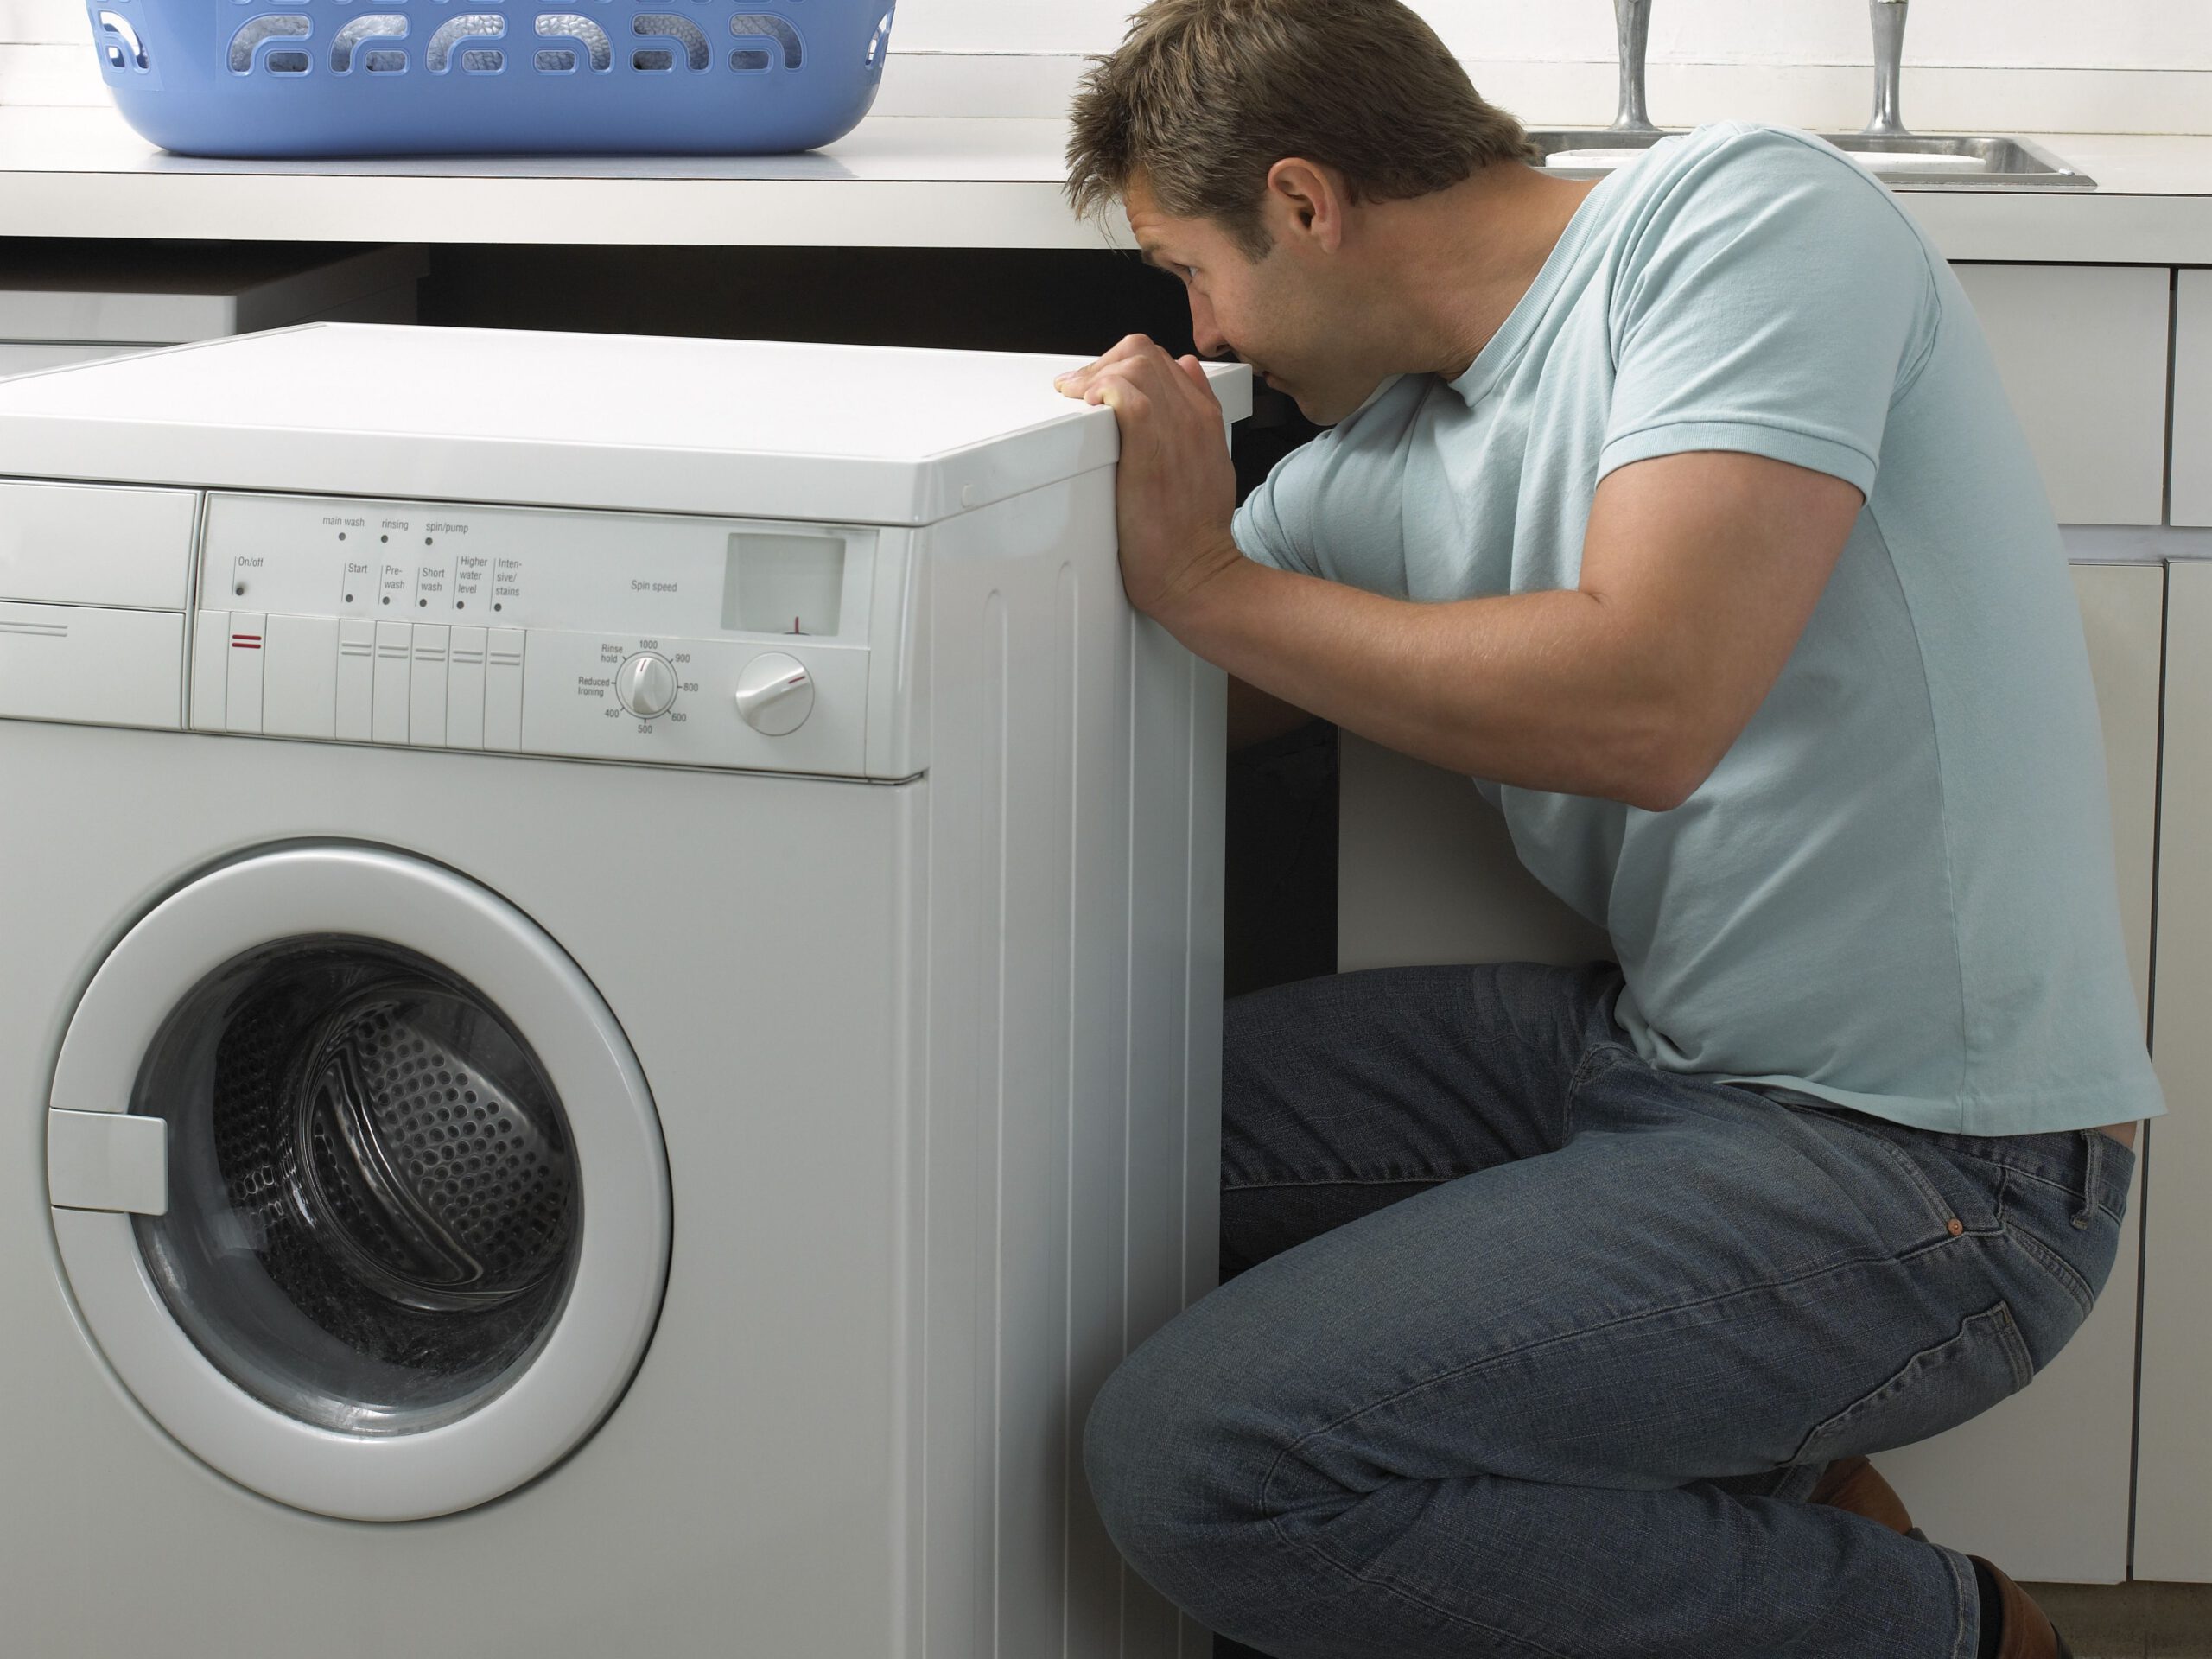 Level the Washer to Prevent Noises